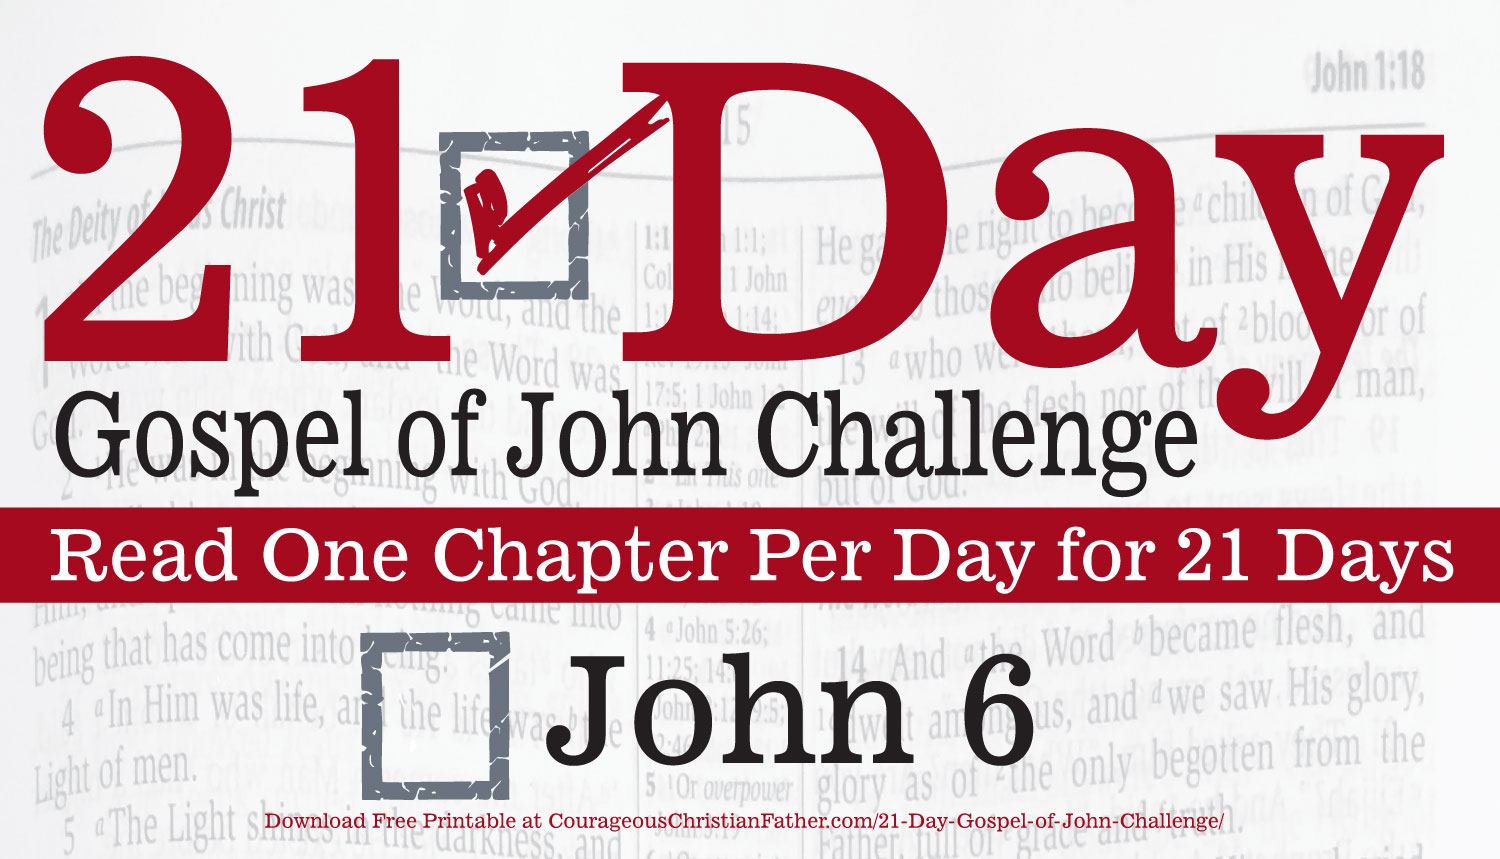 John 6 - Today is Day 6 of the 21 Day Gospel of John Challenge. That means you will need to read the sixth chapter of John. #John6